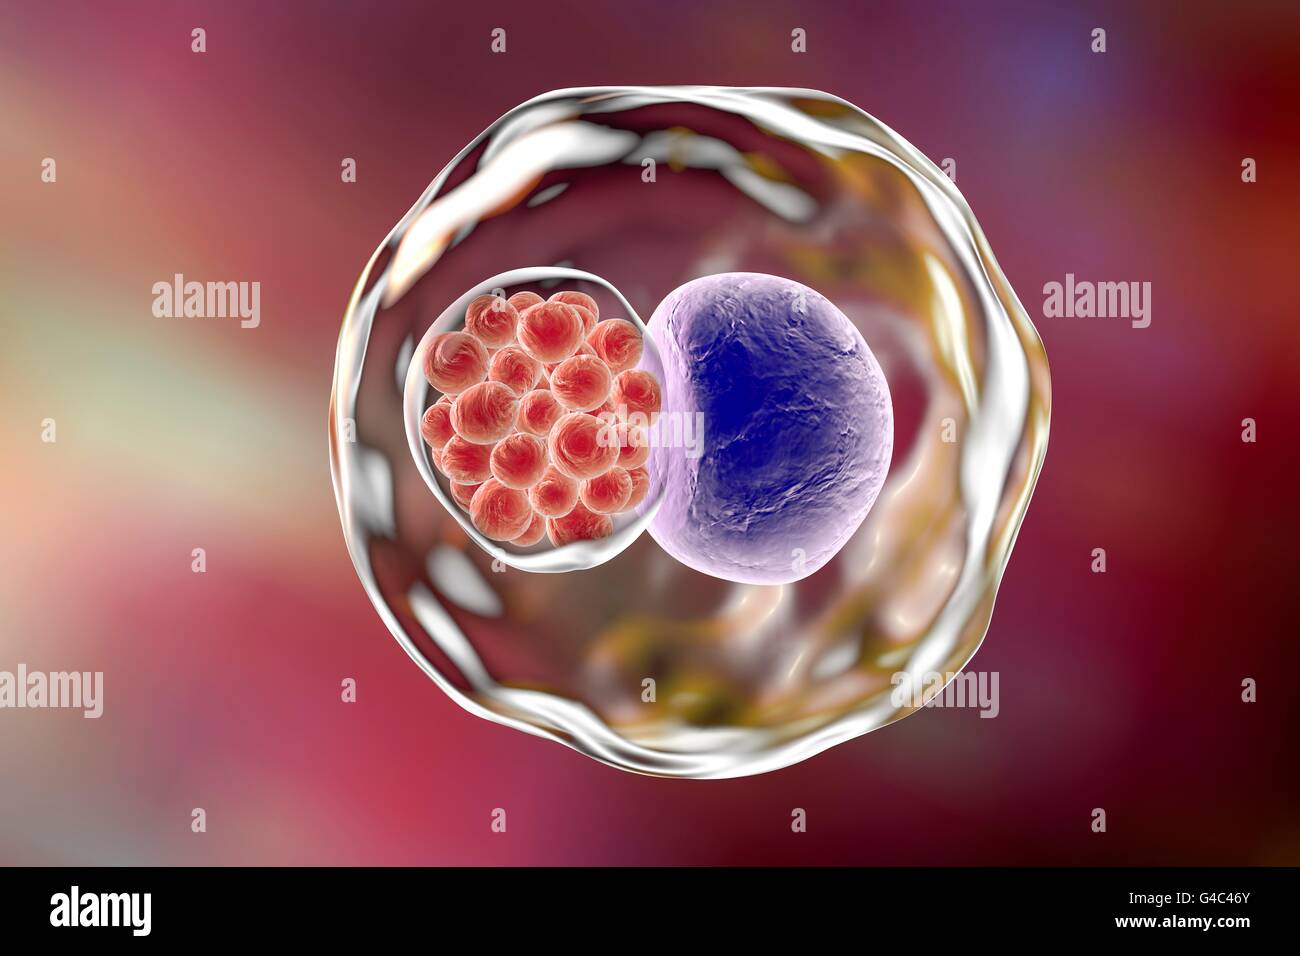 Chlamydia bacteria in a cell. Computer illustration showing an inclusion composed of a group of chlamydia (red) near the nucleus (violet) of a cell. Stock Photo